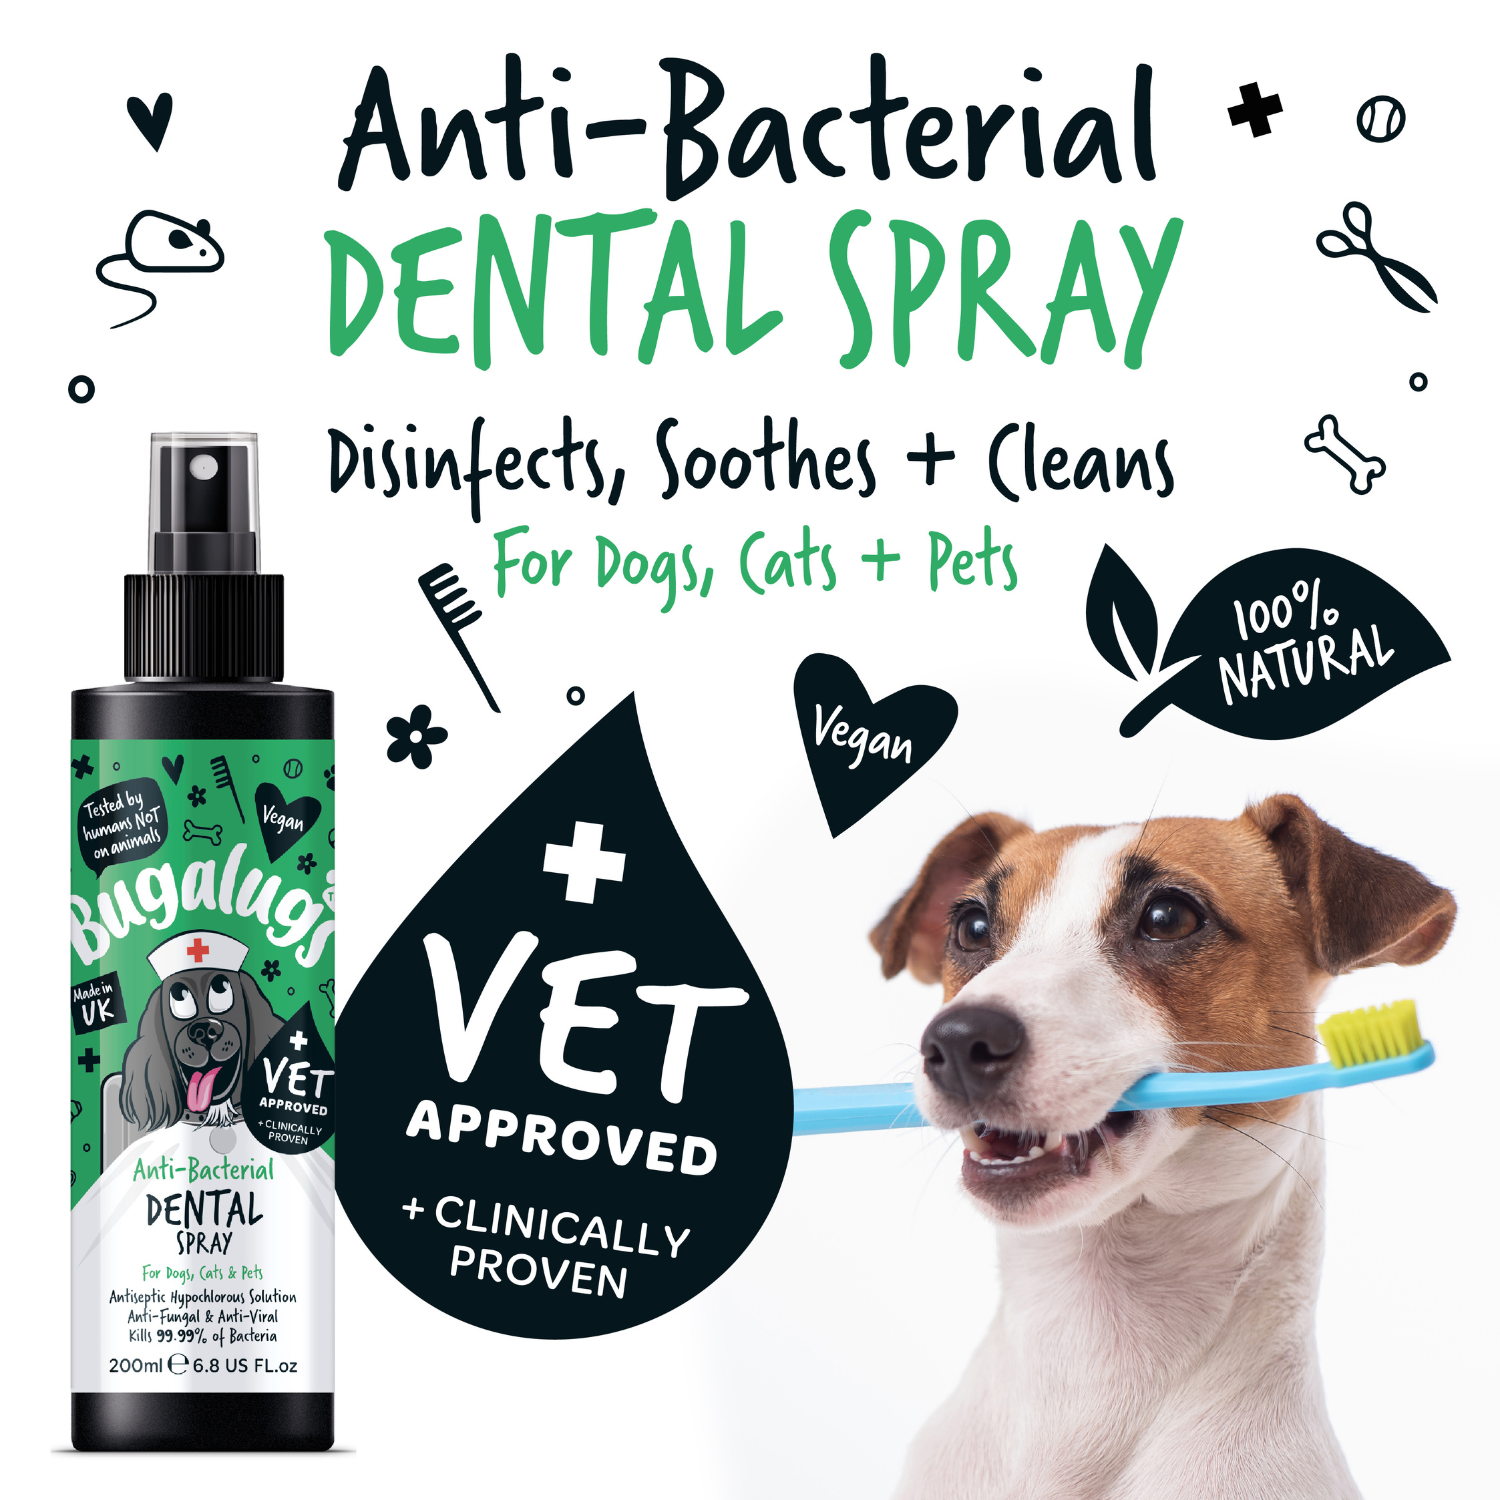 Bugalugs Anti-bacterial Dental Spray for Dogs, Cats and Pets - Disinfects, soothes and cleans